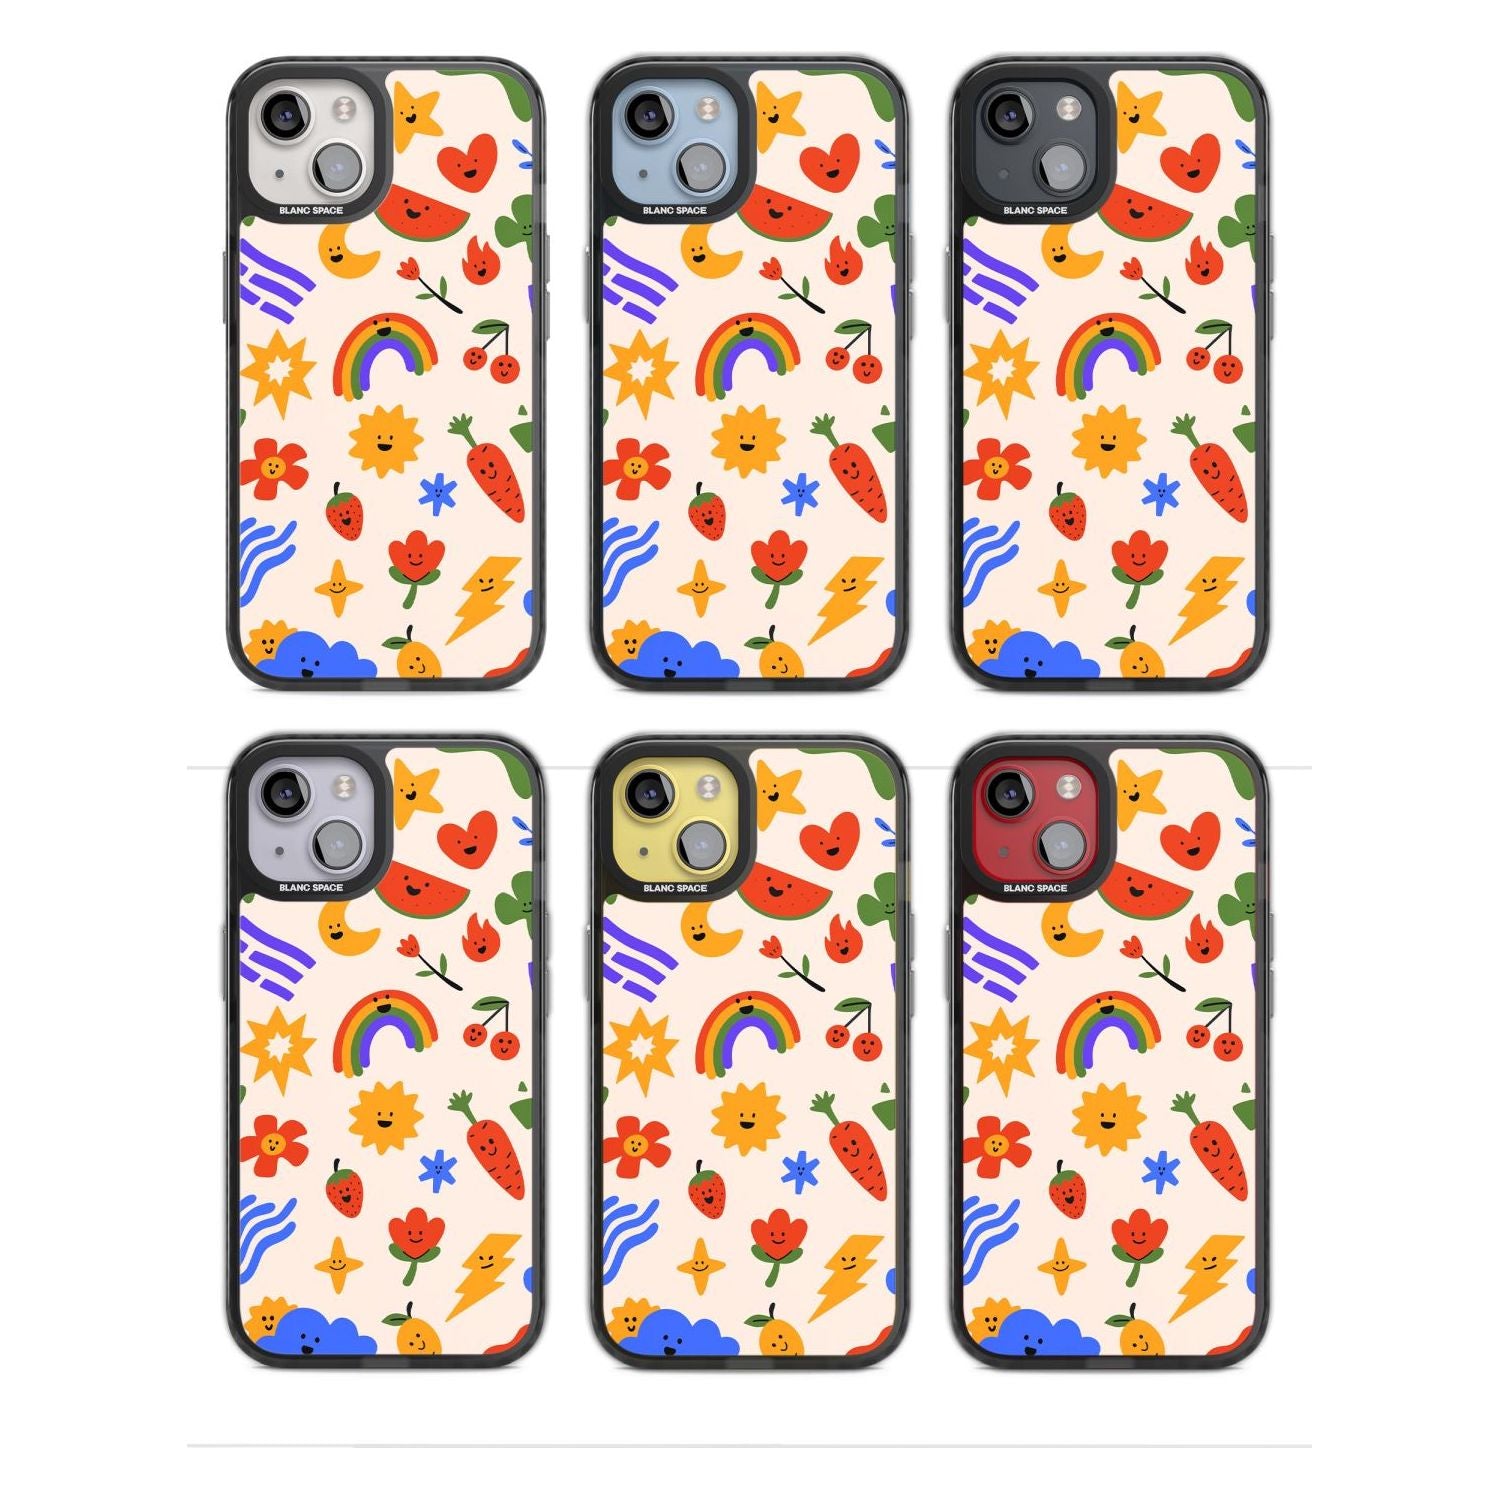 Mixed Large Kawaii Icons - Solid Phone Case iPhone 15 Pro Max / Black Impact Case,iPhone 15 Plus / Black Impact Case,iPhone 15 Pro / Black Impact Case,iPhone 15 / Black Impact Case,iPhone 15 Pro Max / Impact Case,iPhone 15 Plus / Impact Case,iPhone 15 Pro / Impact Case,iPhone 15 / Impact Case,iPhone 15 Pro Max / Magsafe Black Impact Case,iPhone 15 Plus / Magsafe Black Impact Case,iPhone 15 Pro / Magsafe Black Impact Case,iPhone 15 / Magsafe Black Impact Case,iPhone 14 Pro Max / Black Impact Case,iPhone 14 P